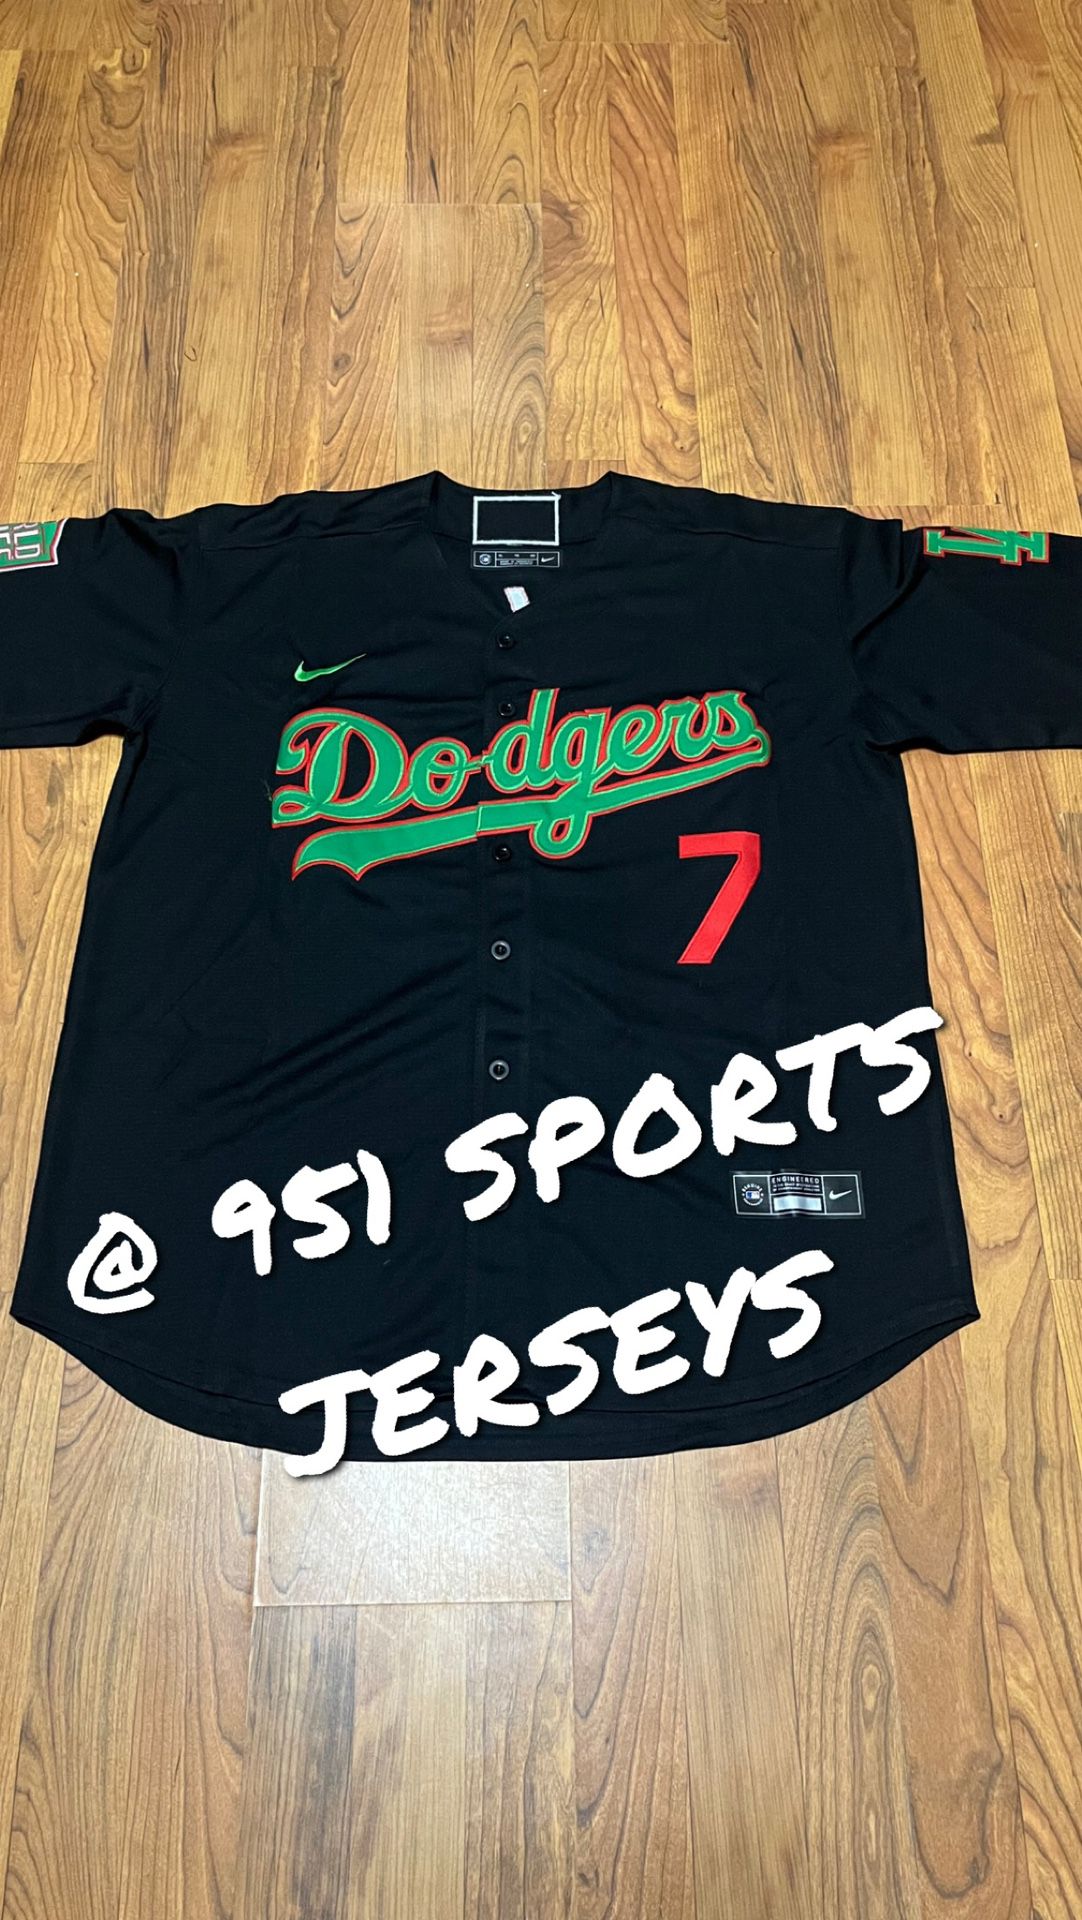 Urias Black Mexico Dodgers Jersey 3XL for Sale in Orange, CA